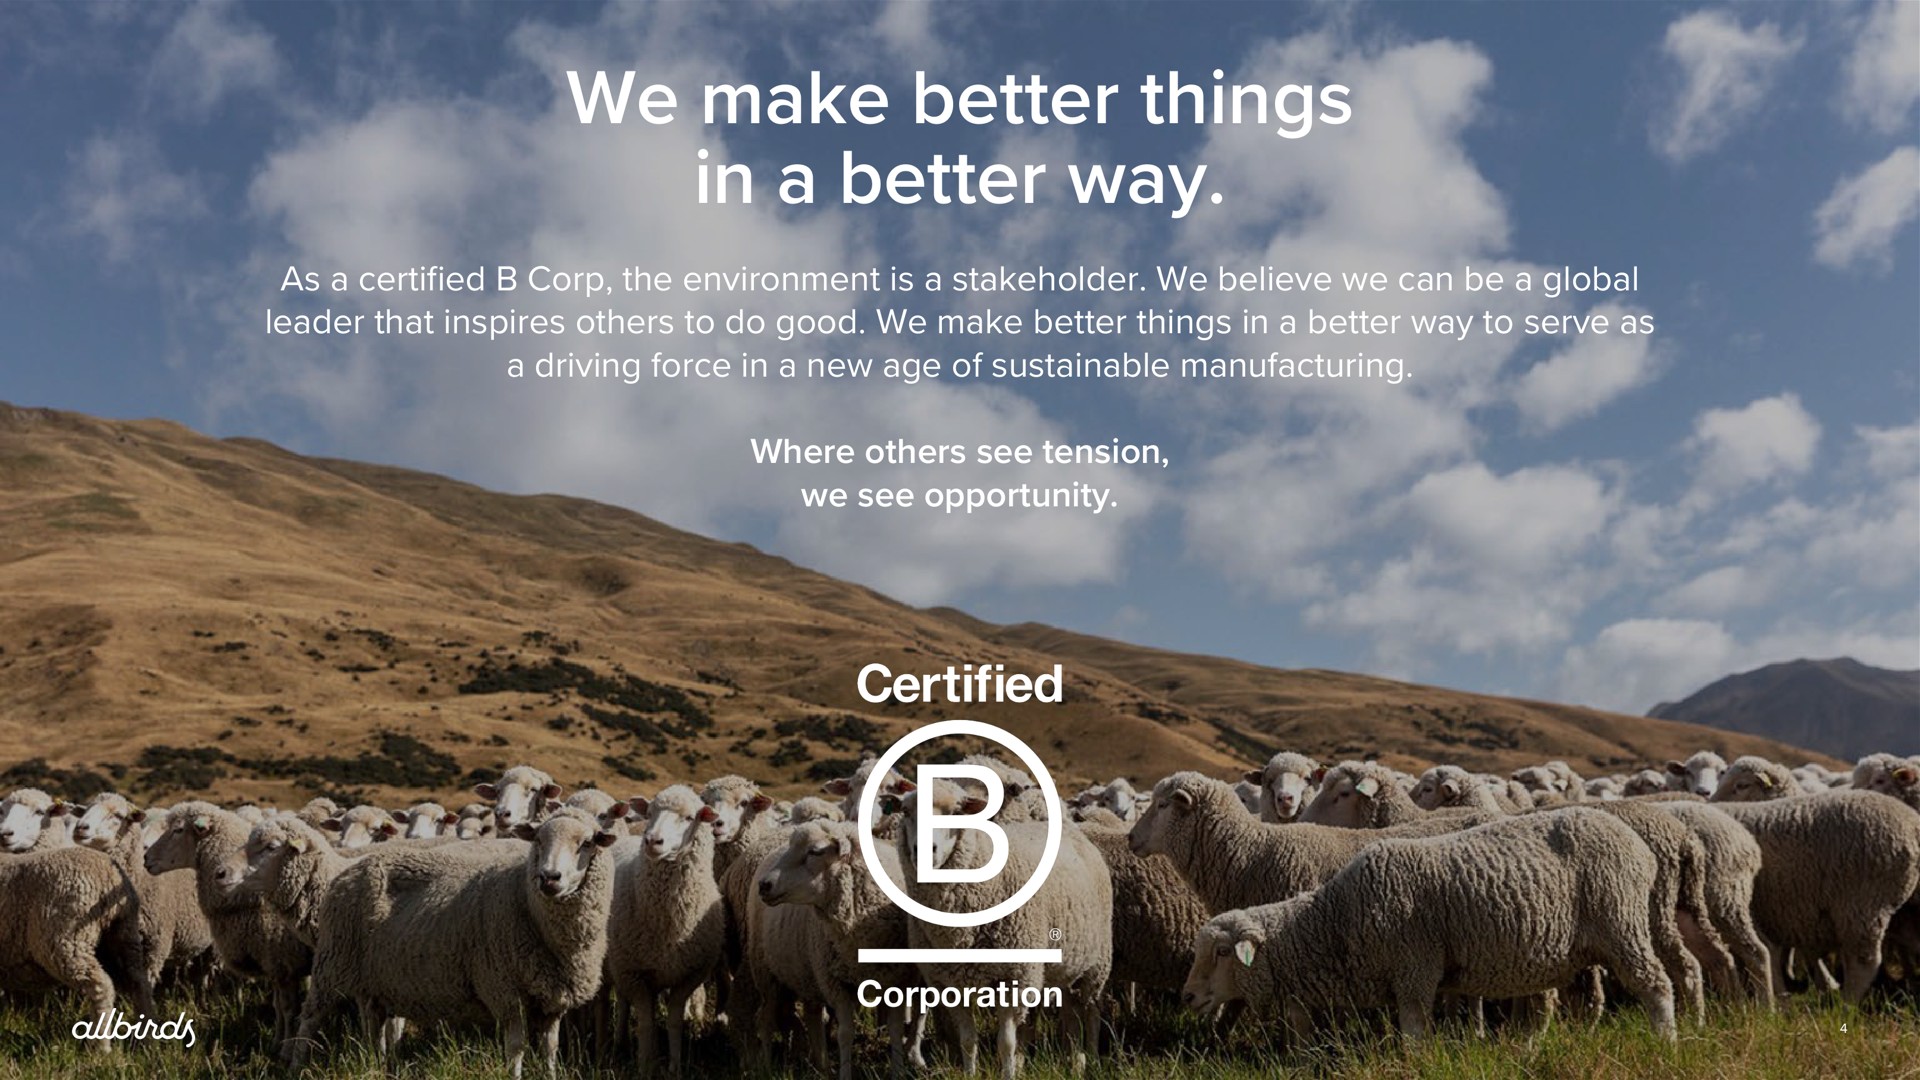 we make better things in a better way as a certified corp the environment is a stakeholder we believe we can be a global leader that inspires to do good we make better things in a better way to serve as a driving force in a new age of sustainable manufacturing where see tension we see opportunity | Allbirds